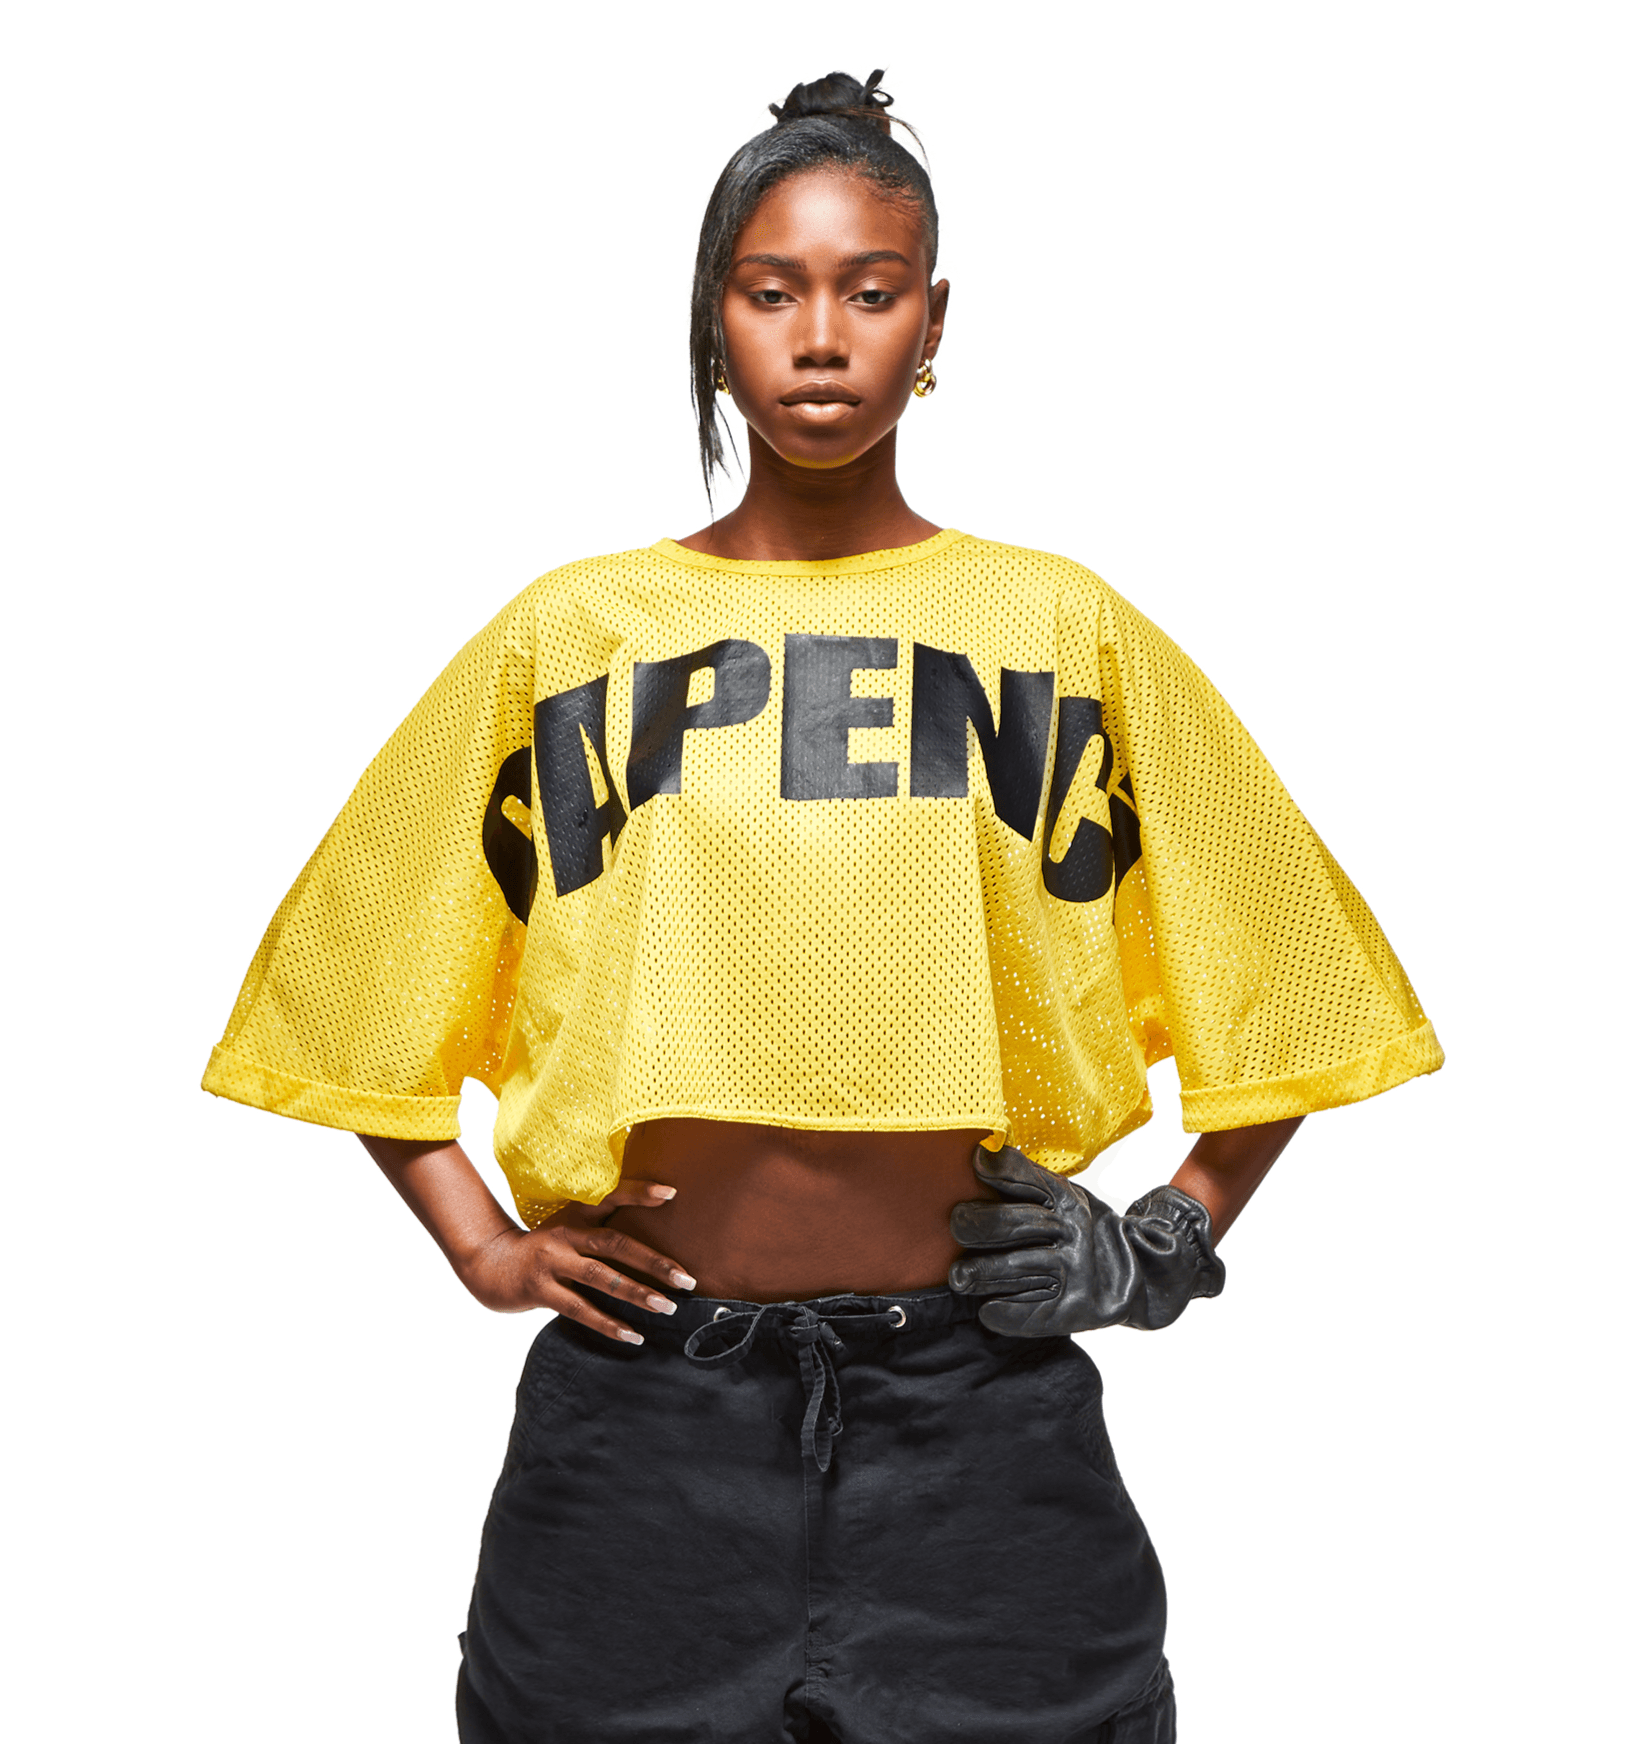 CAPENCi Cropped Jersey - V1croppedyellowjerseyfront